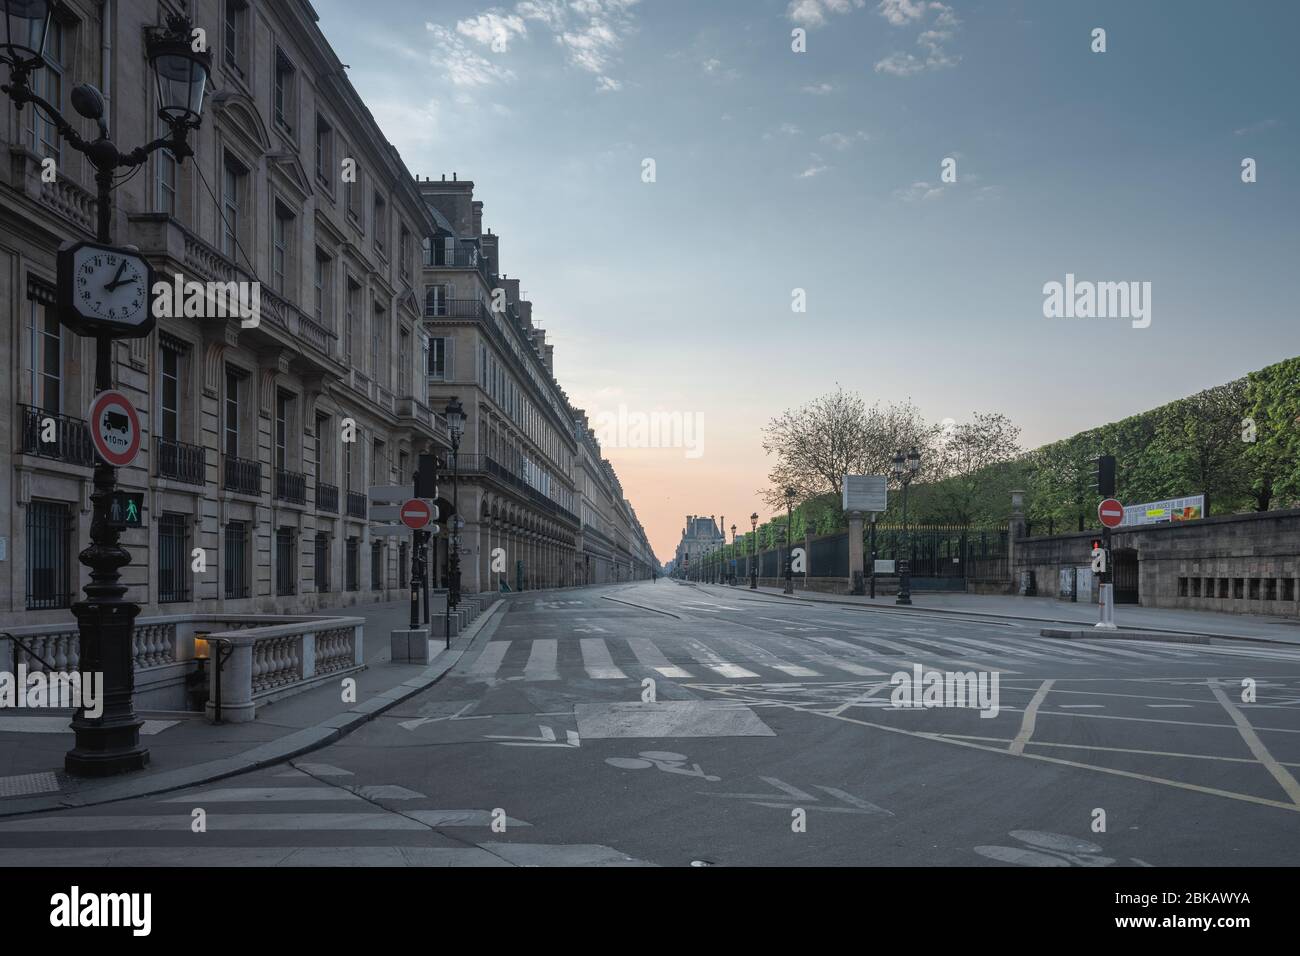 COVID-19 : Rue de Rivoli, Paris, April 2020 - During the lockdown, morning on the main street of the capitale before closing it definitely to cars. Stock Photo